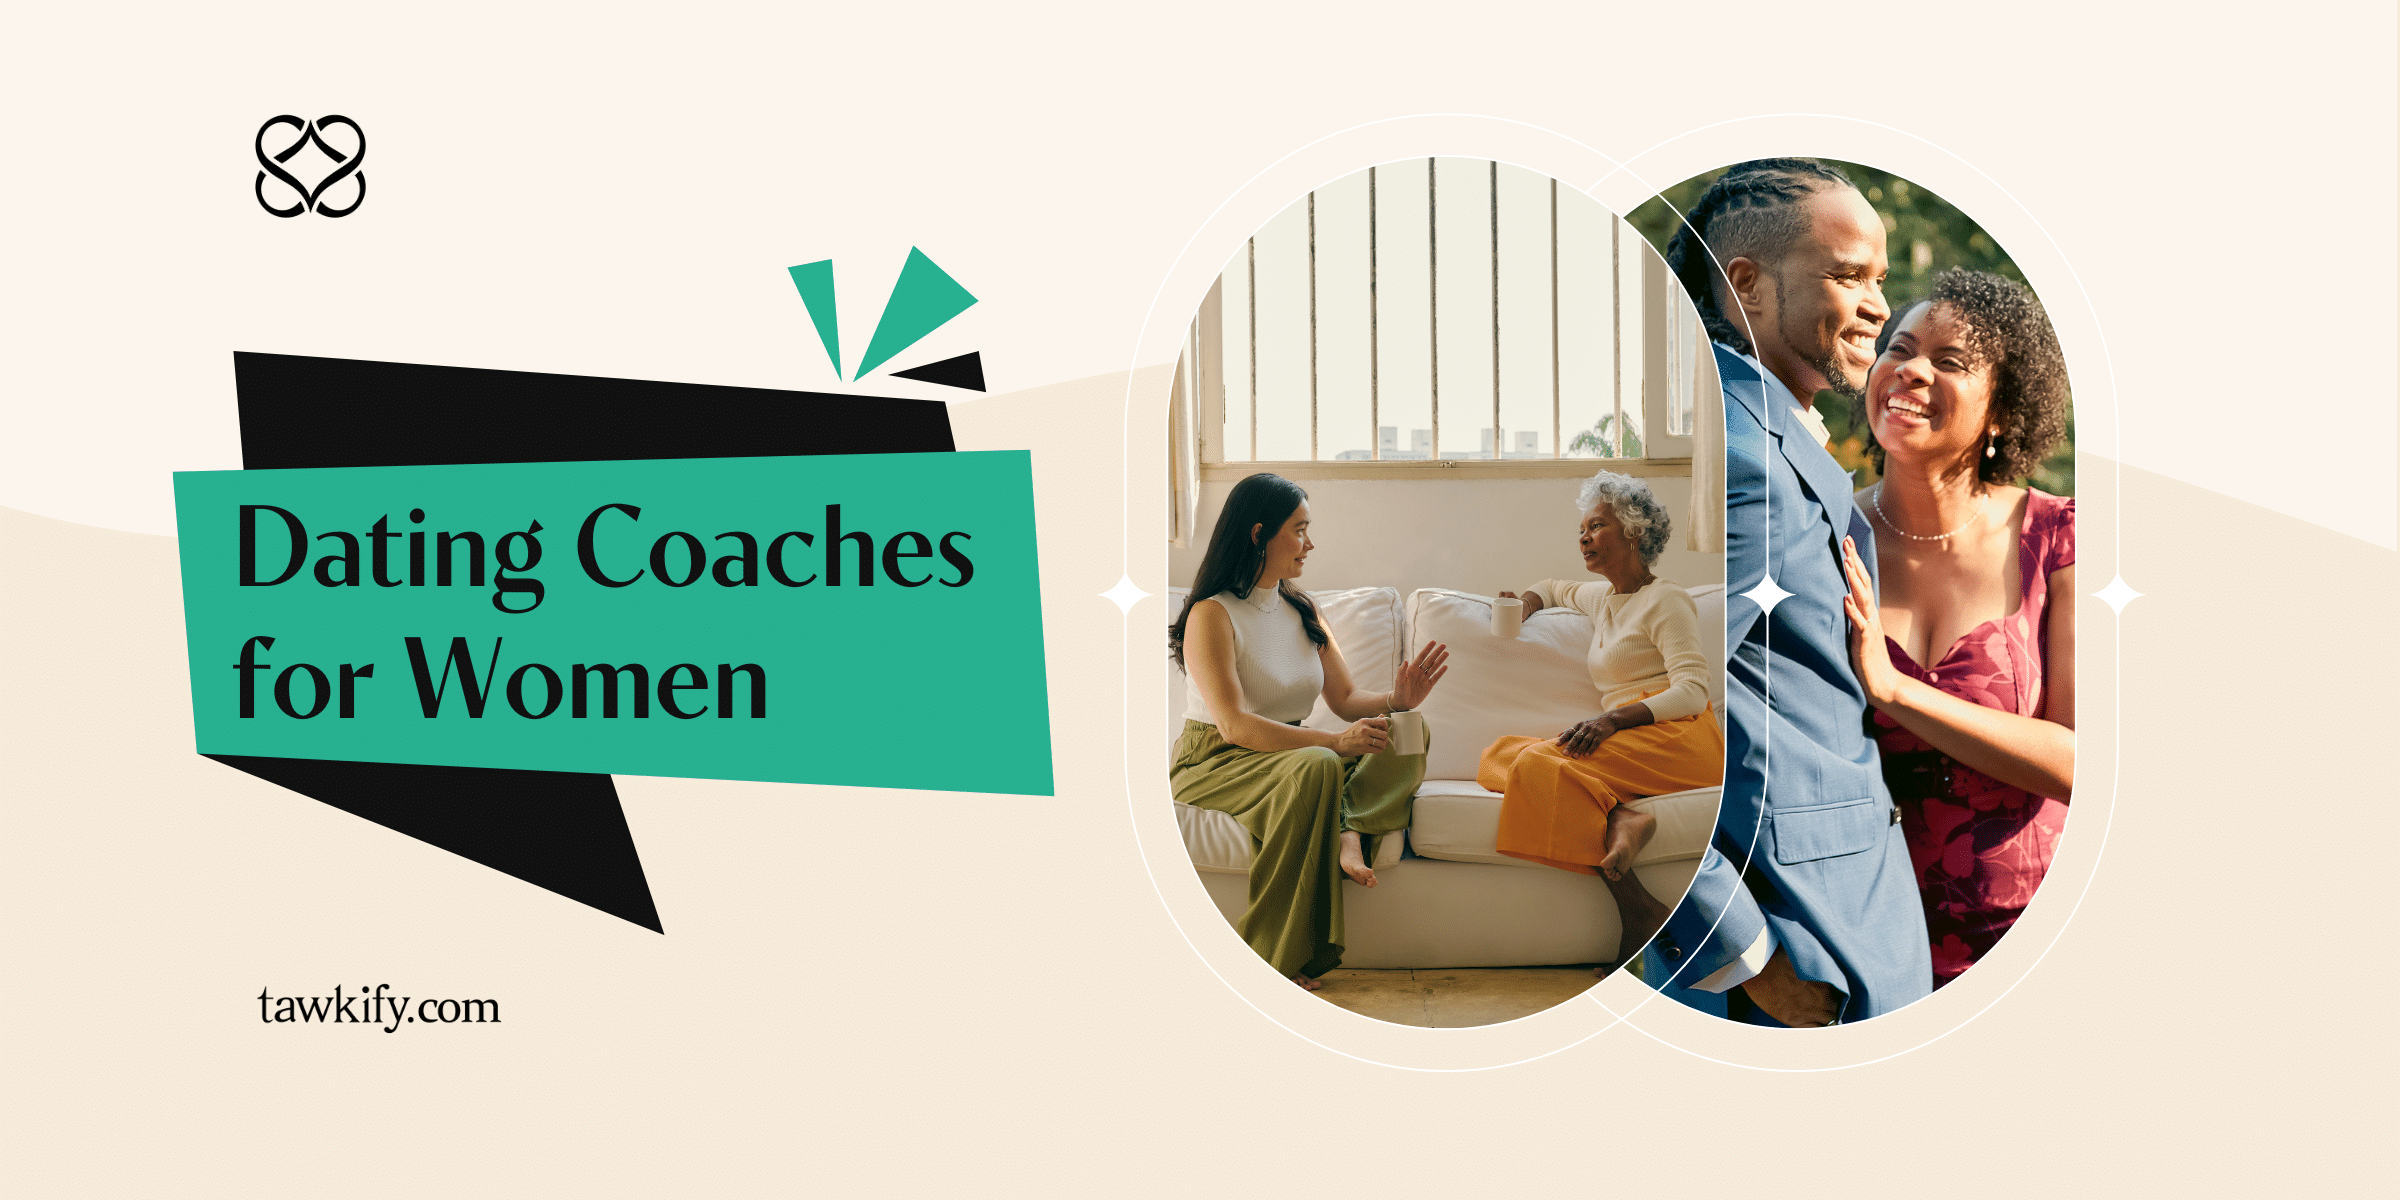 Discover how dating coaches can transform your journey to relationship success, empowering you with confidence, clarity, and skills to find lasting love.